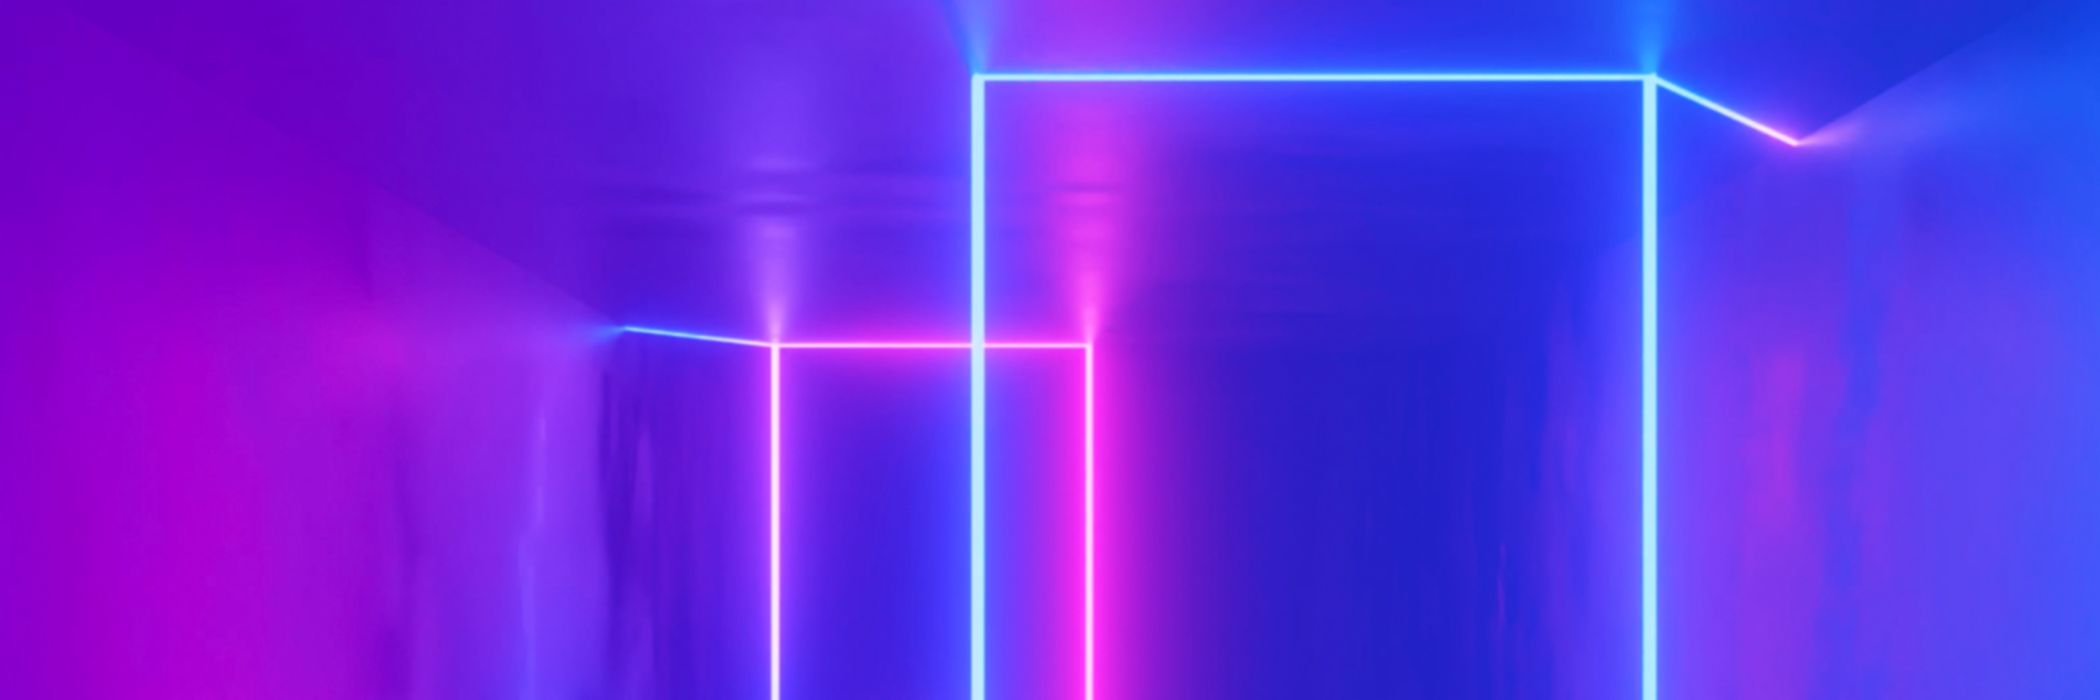 Blue and pink lines abstract